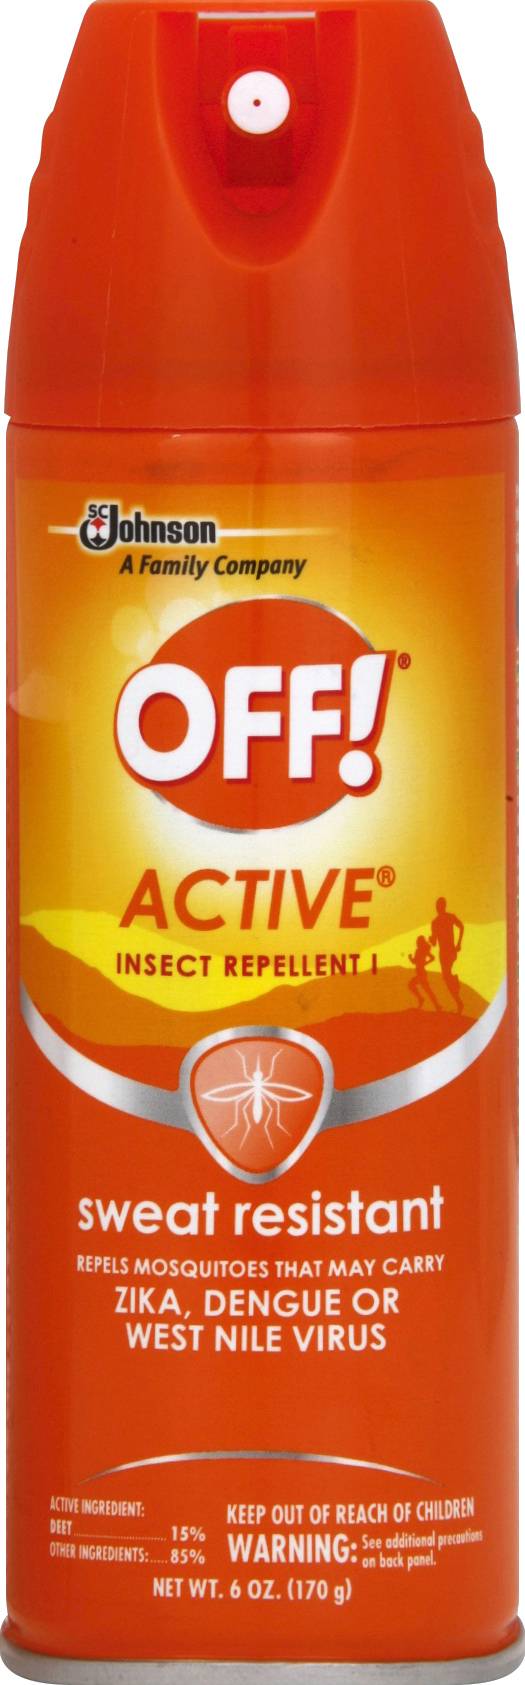 Off! Active Sweat Resistant Insect Repellent